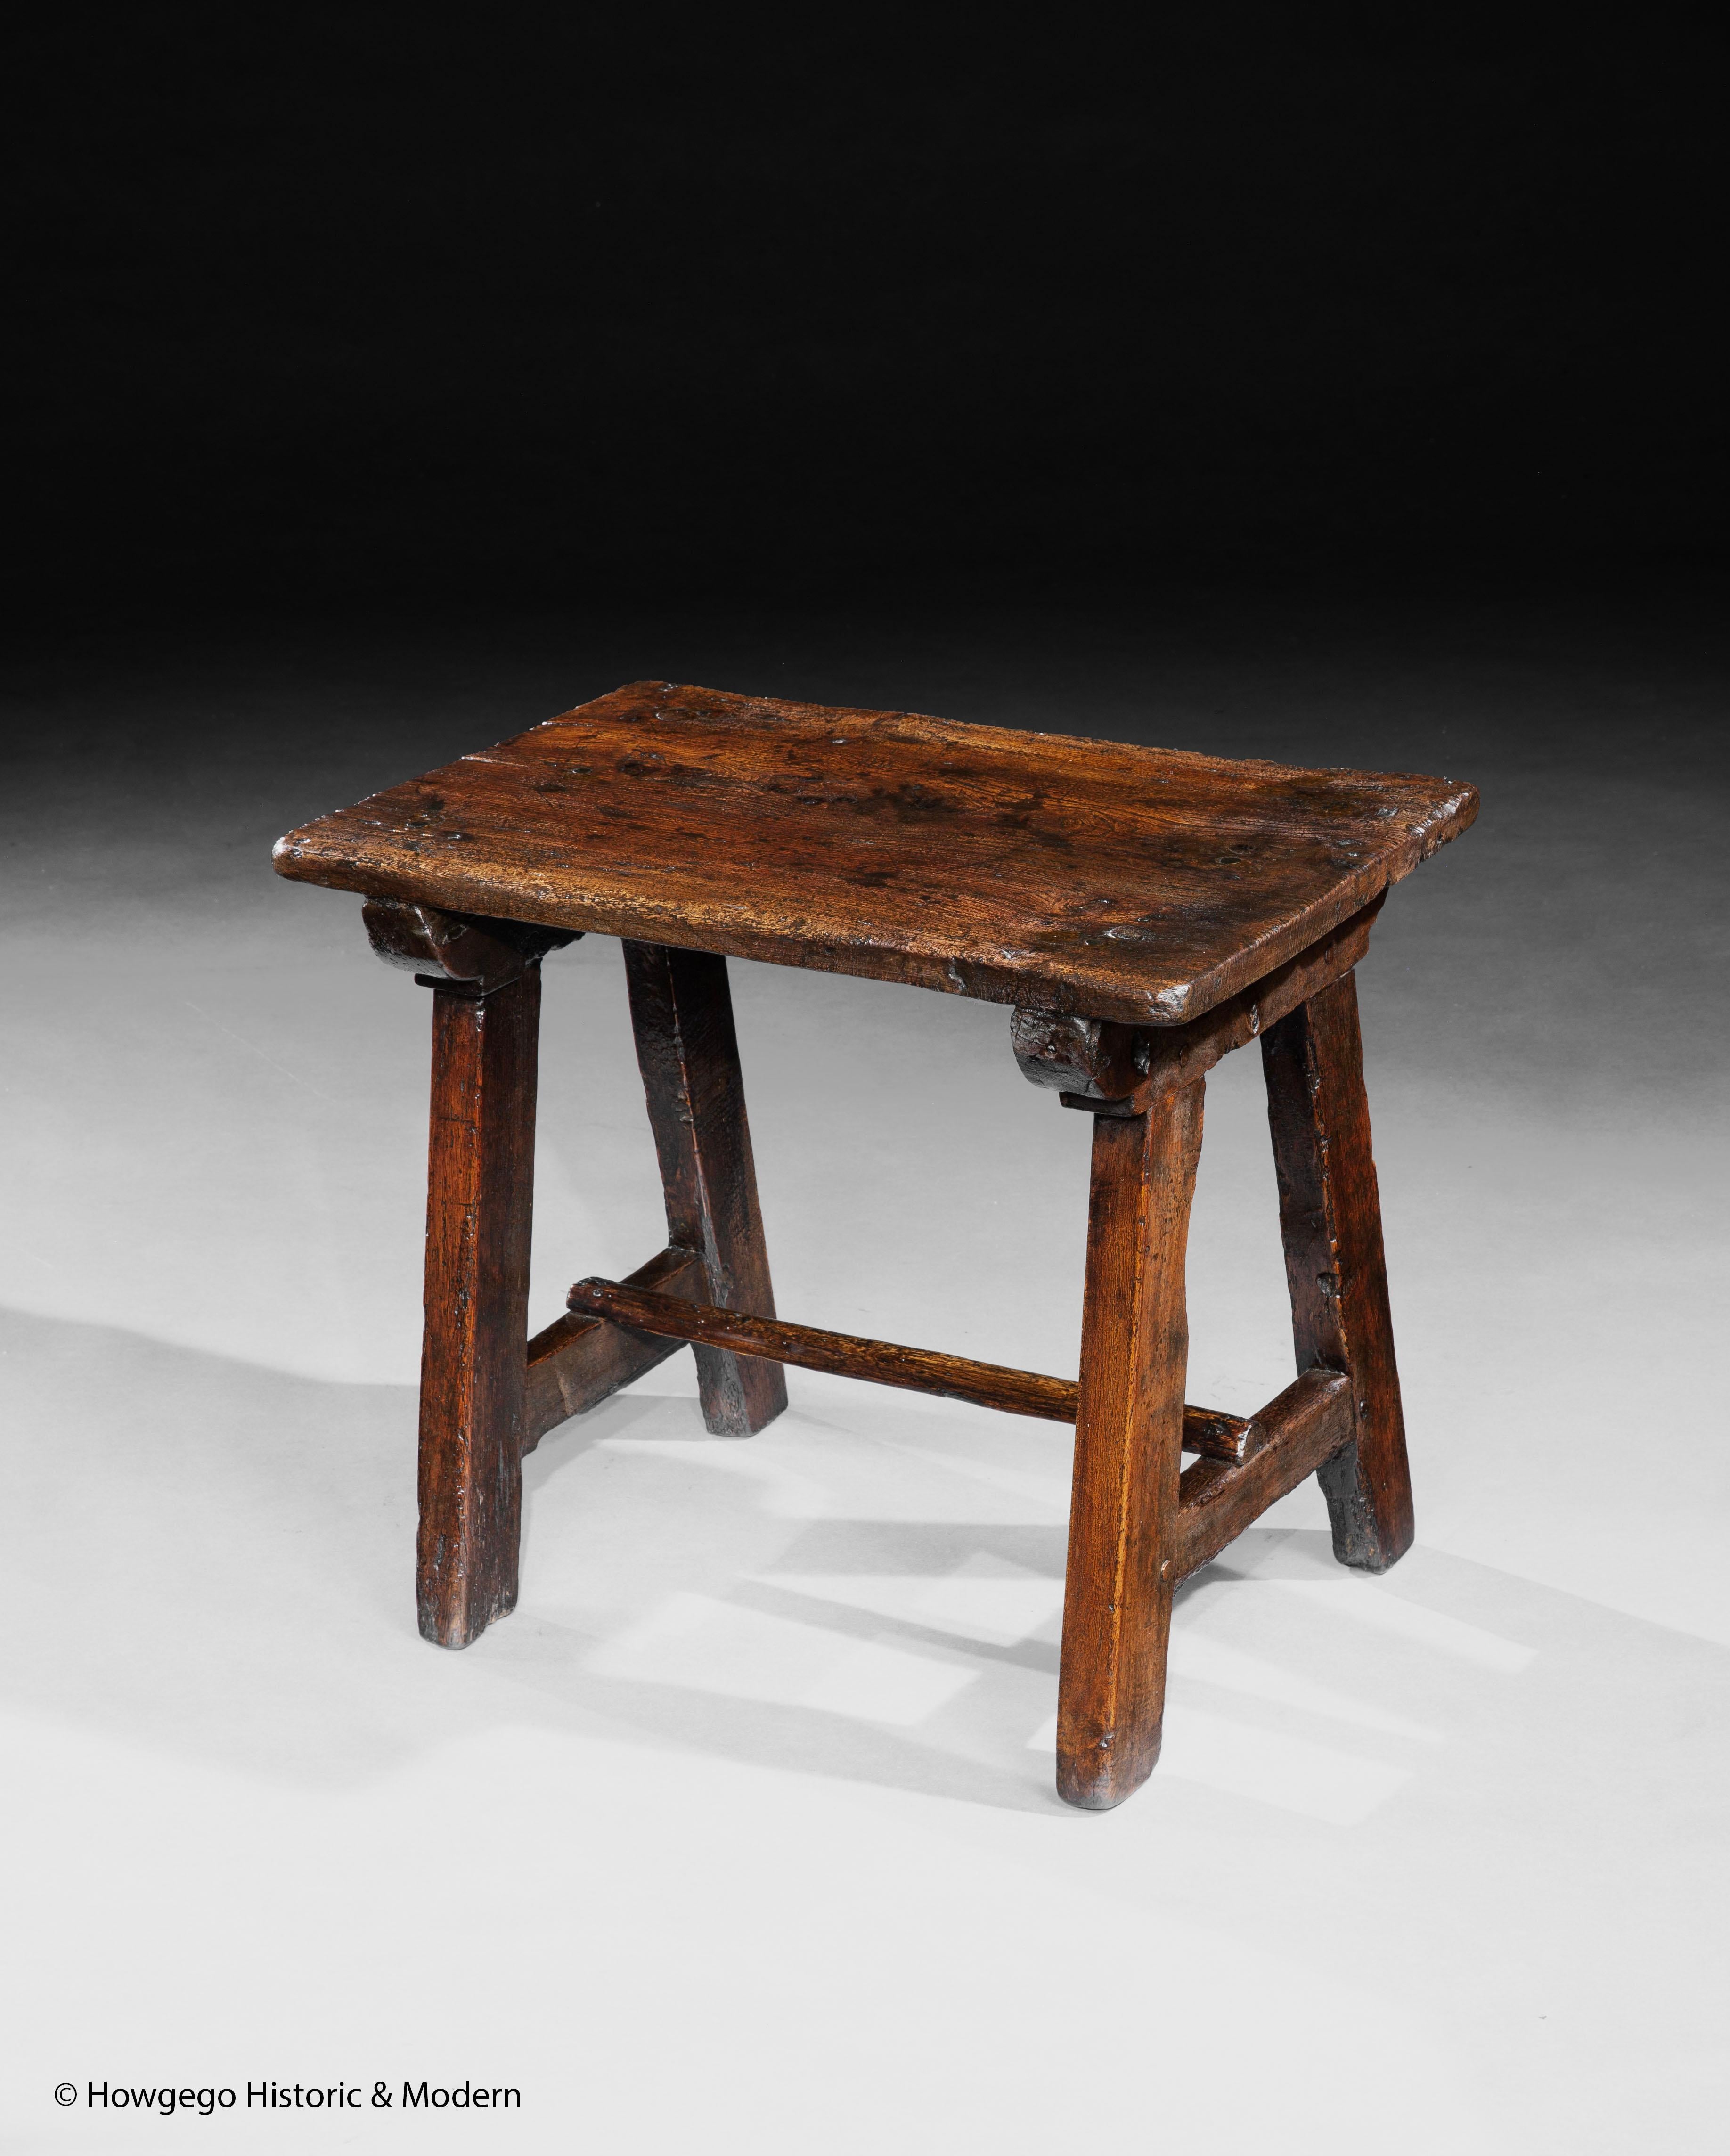 - Rare small size, perfect height for sofa's and modern armchairs
- The single plank elm top with beautiful figuring and stick legs are characteristic of folk and vernacular furniture
- This table exudes vernacular/folk charm 

Single plank top on